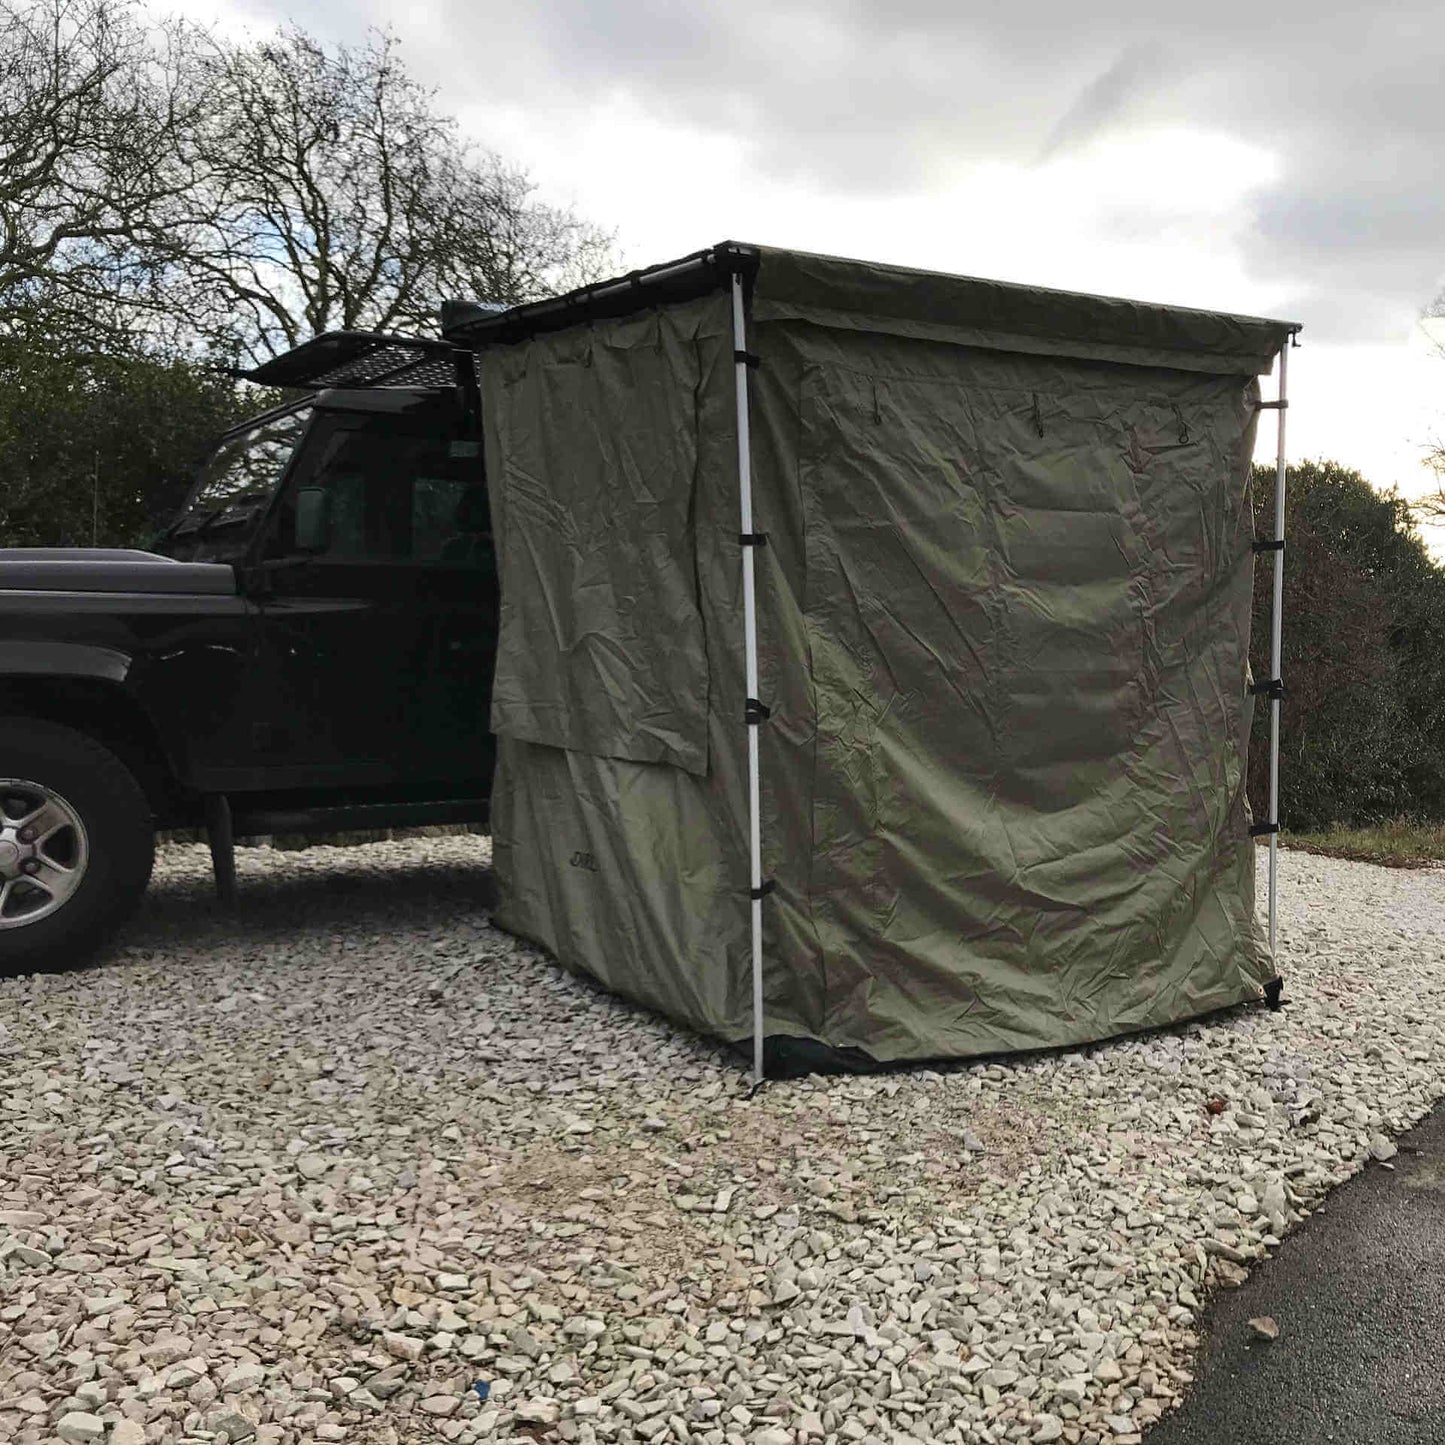 Forest Green Awning Tent Addon for 2mx2m Direct4x4 Pull-out Side Awnings -  - sold by Direct4x4